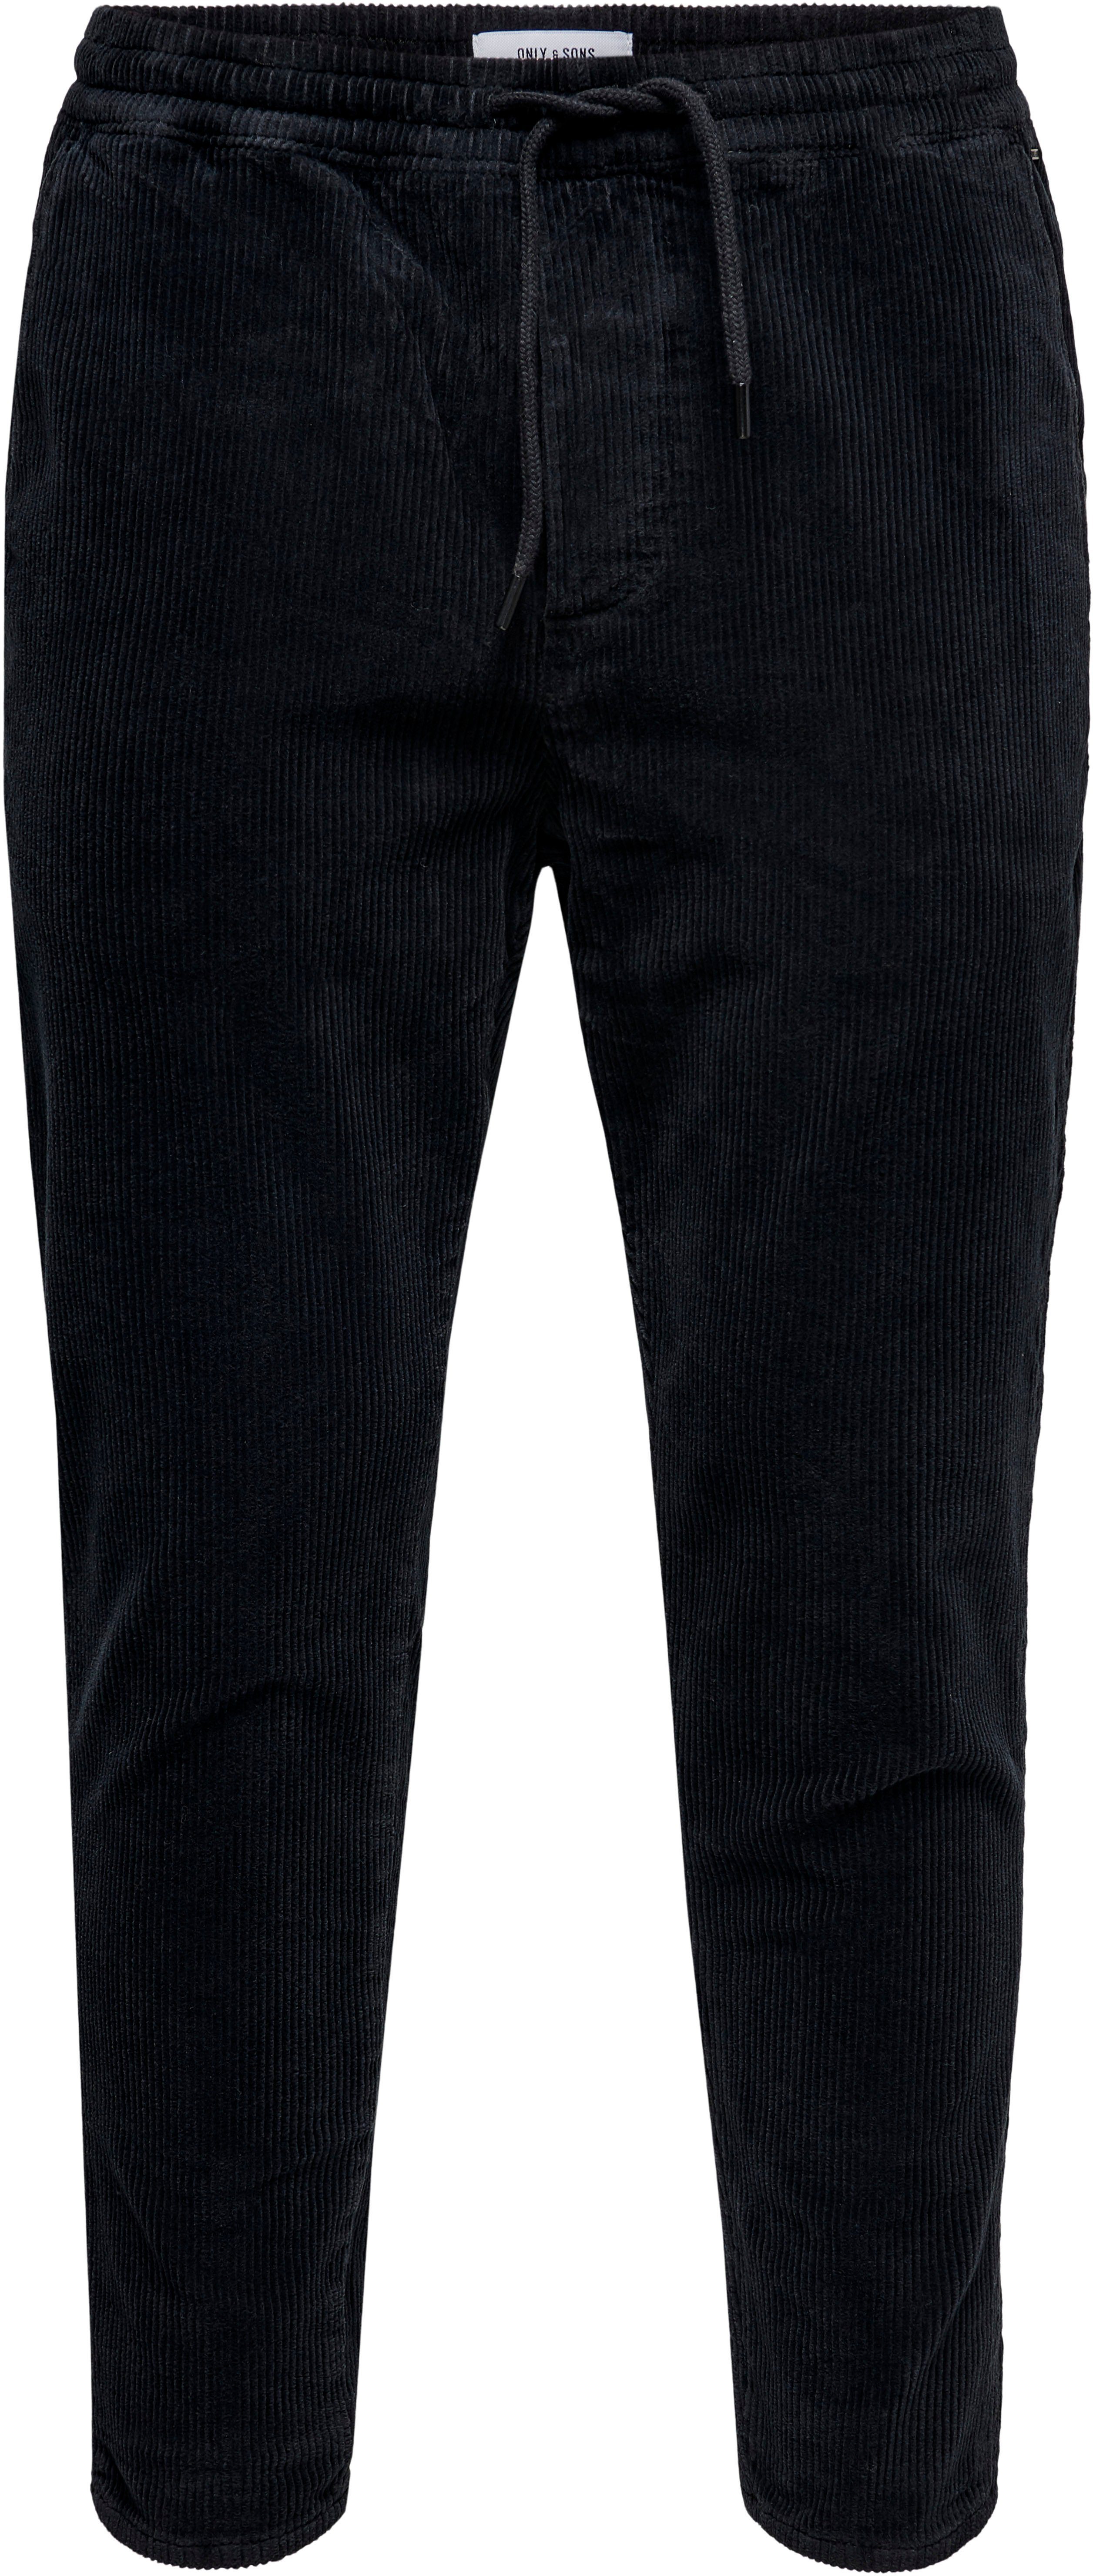 Cordschlupfhose LINUS CORD LIFE ONLY & Black CROPPED SONS